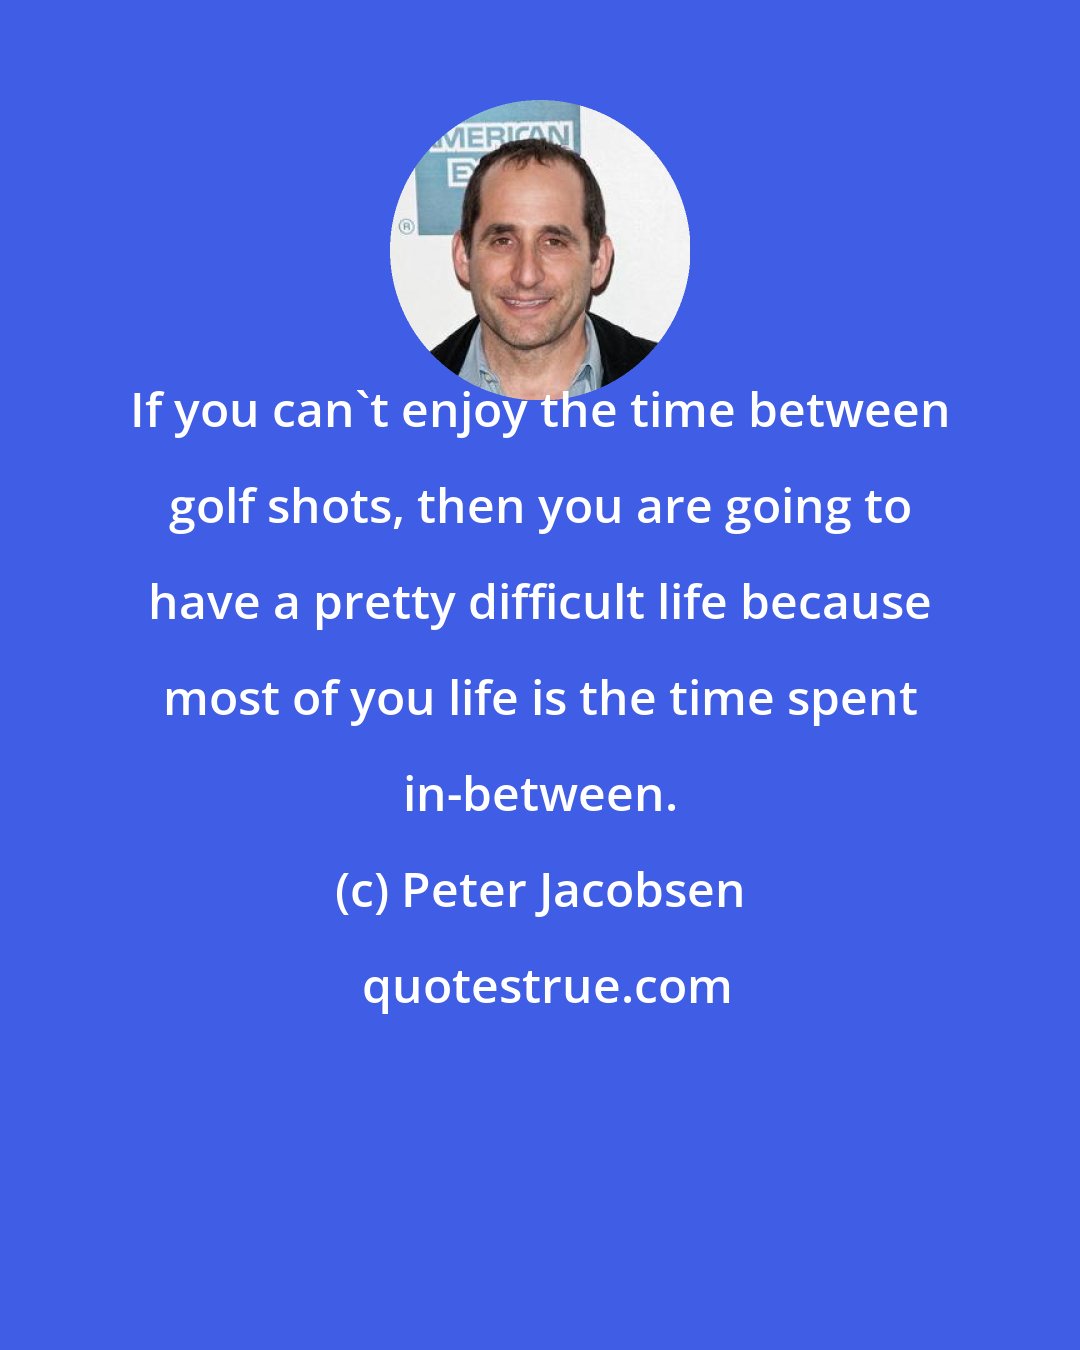 Peter Jacobsen: If you can't enjoy the time between golf shots, then you are going to have a pretty difficult life because most of you life is the time spent in-between.